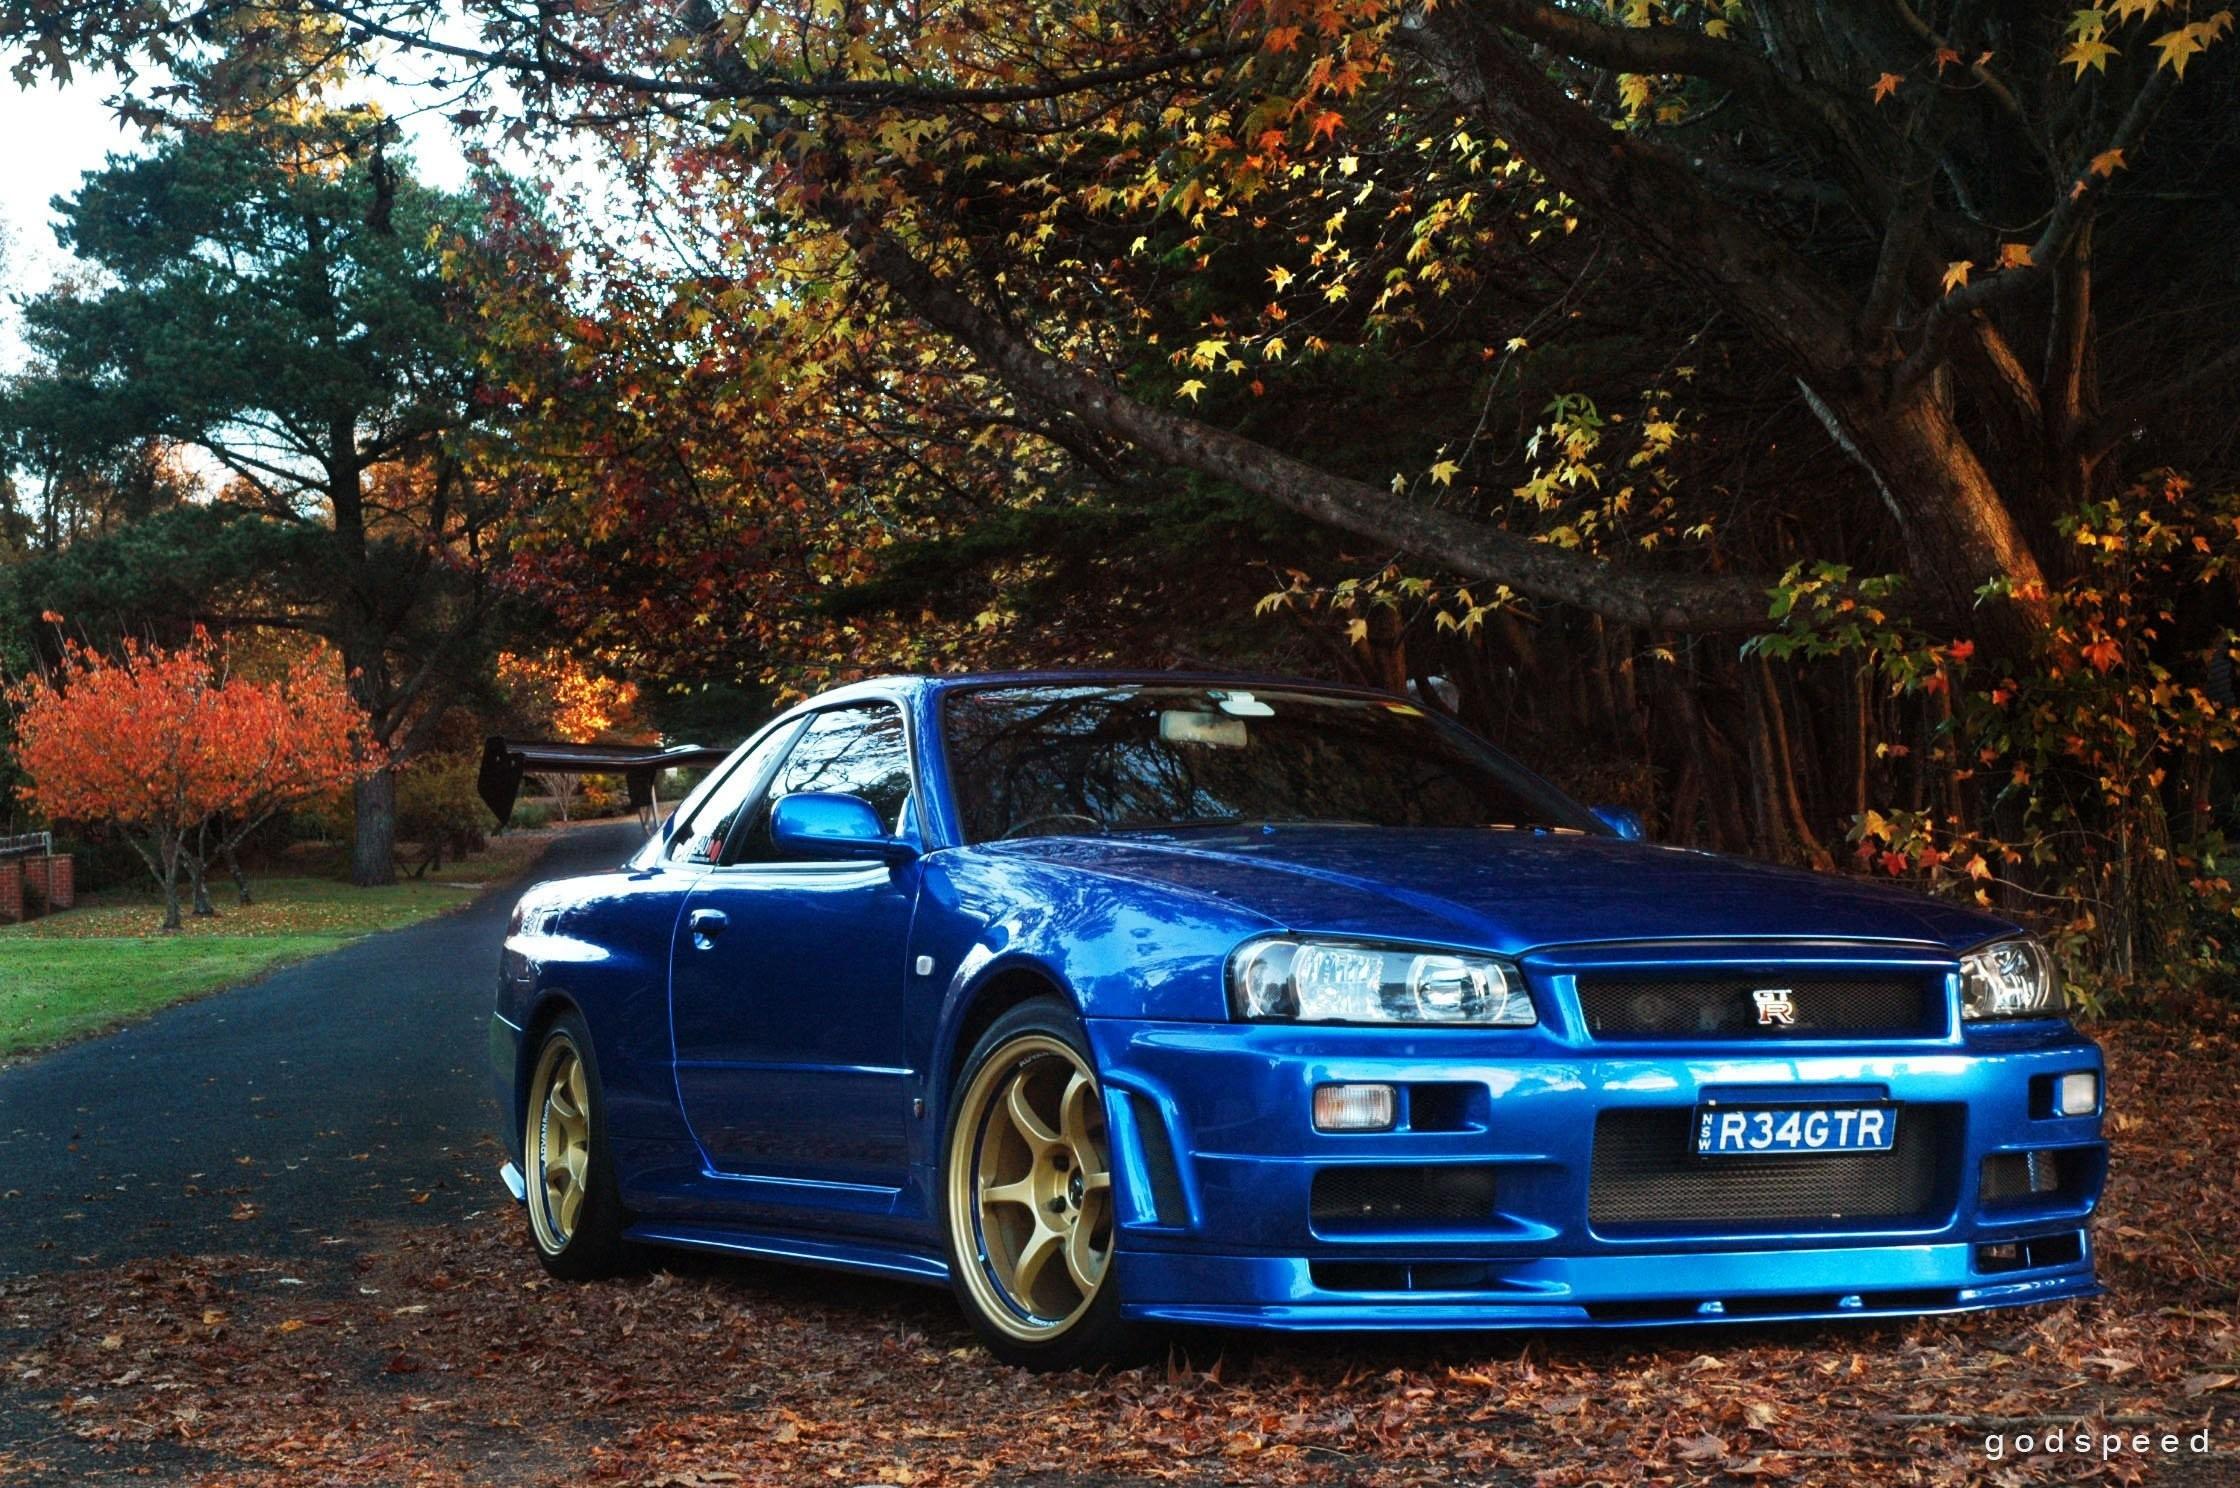 R34 Wallpaper background picture